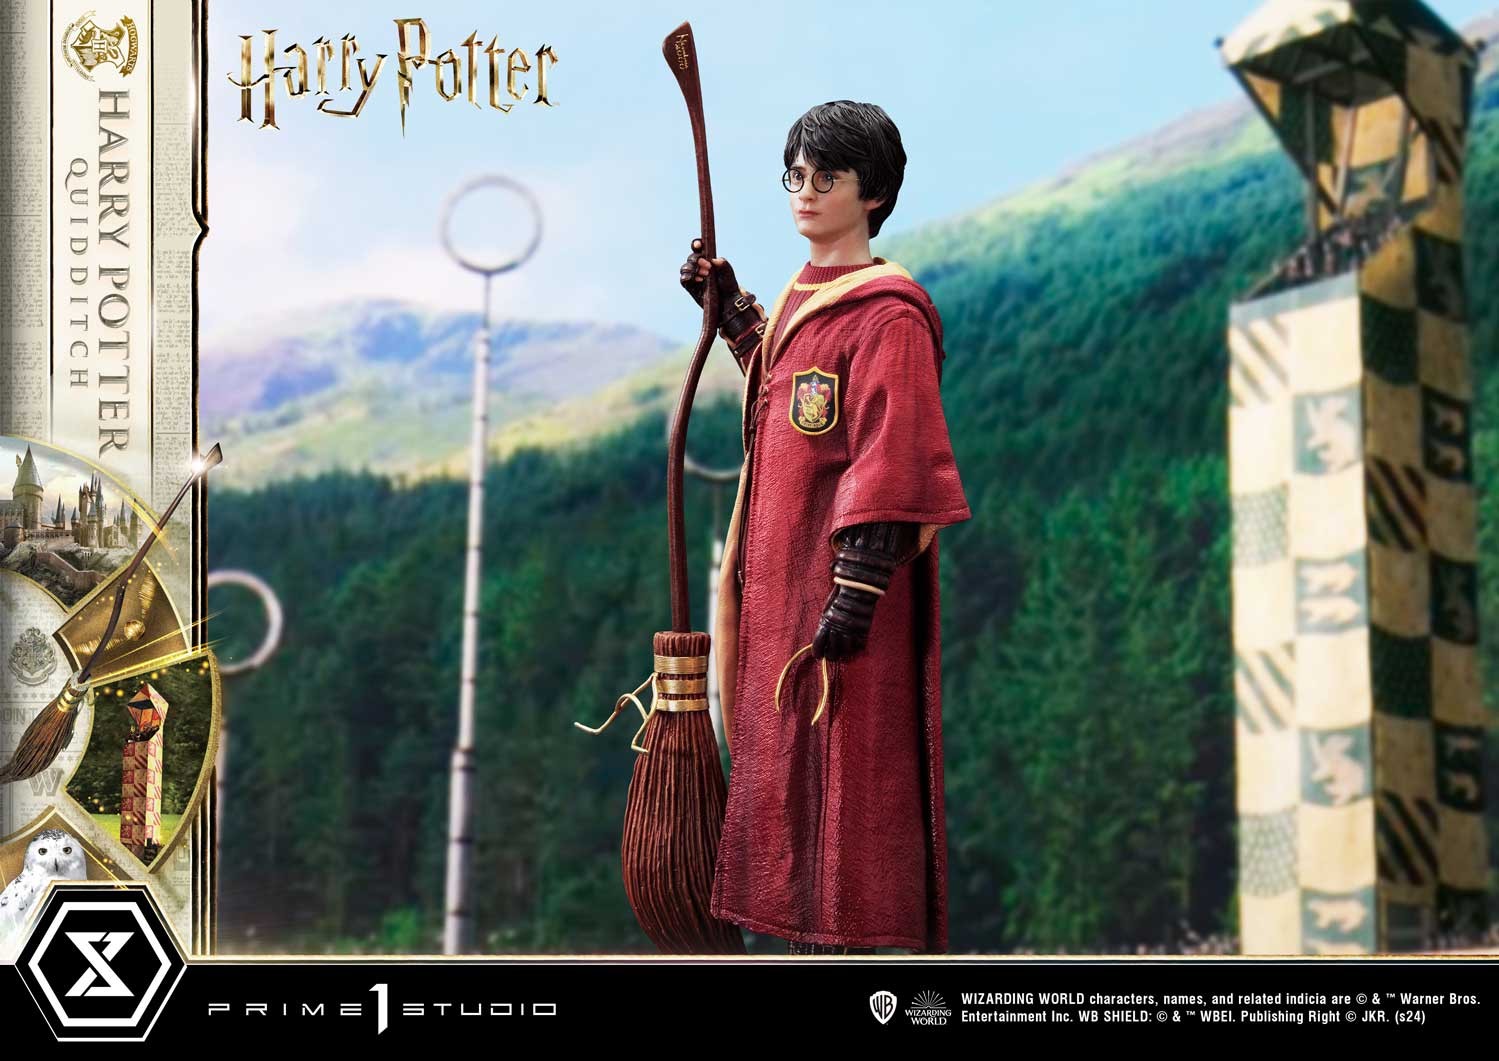 Harry Potter (Quidditch Edition) (Prototype Shown) View 27